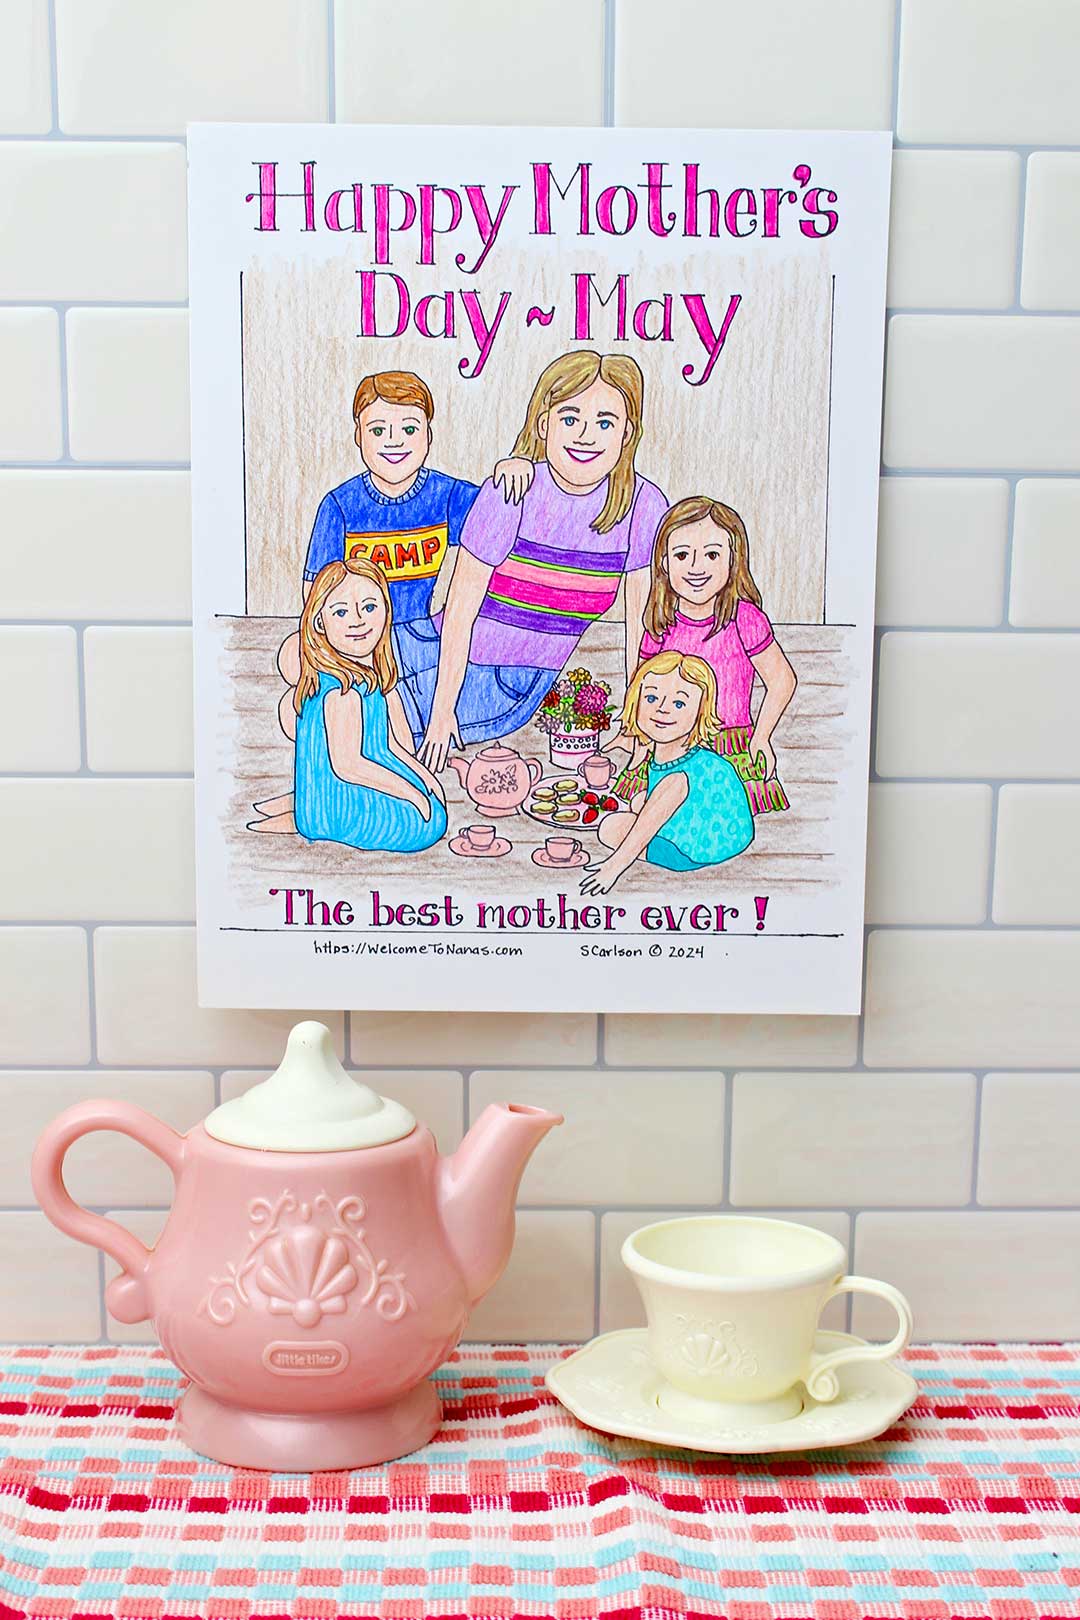 Completed Mother's Day Coloring page attached to tile backsplash with plastic tea set under.